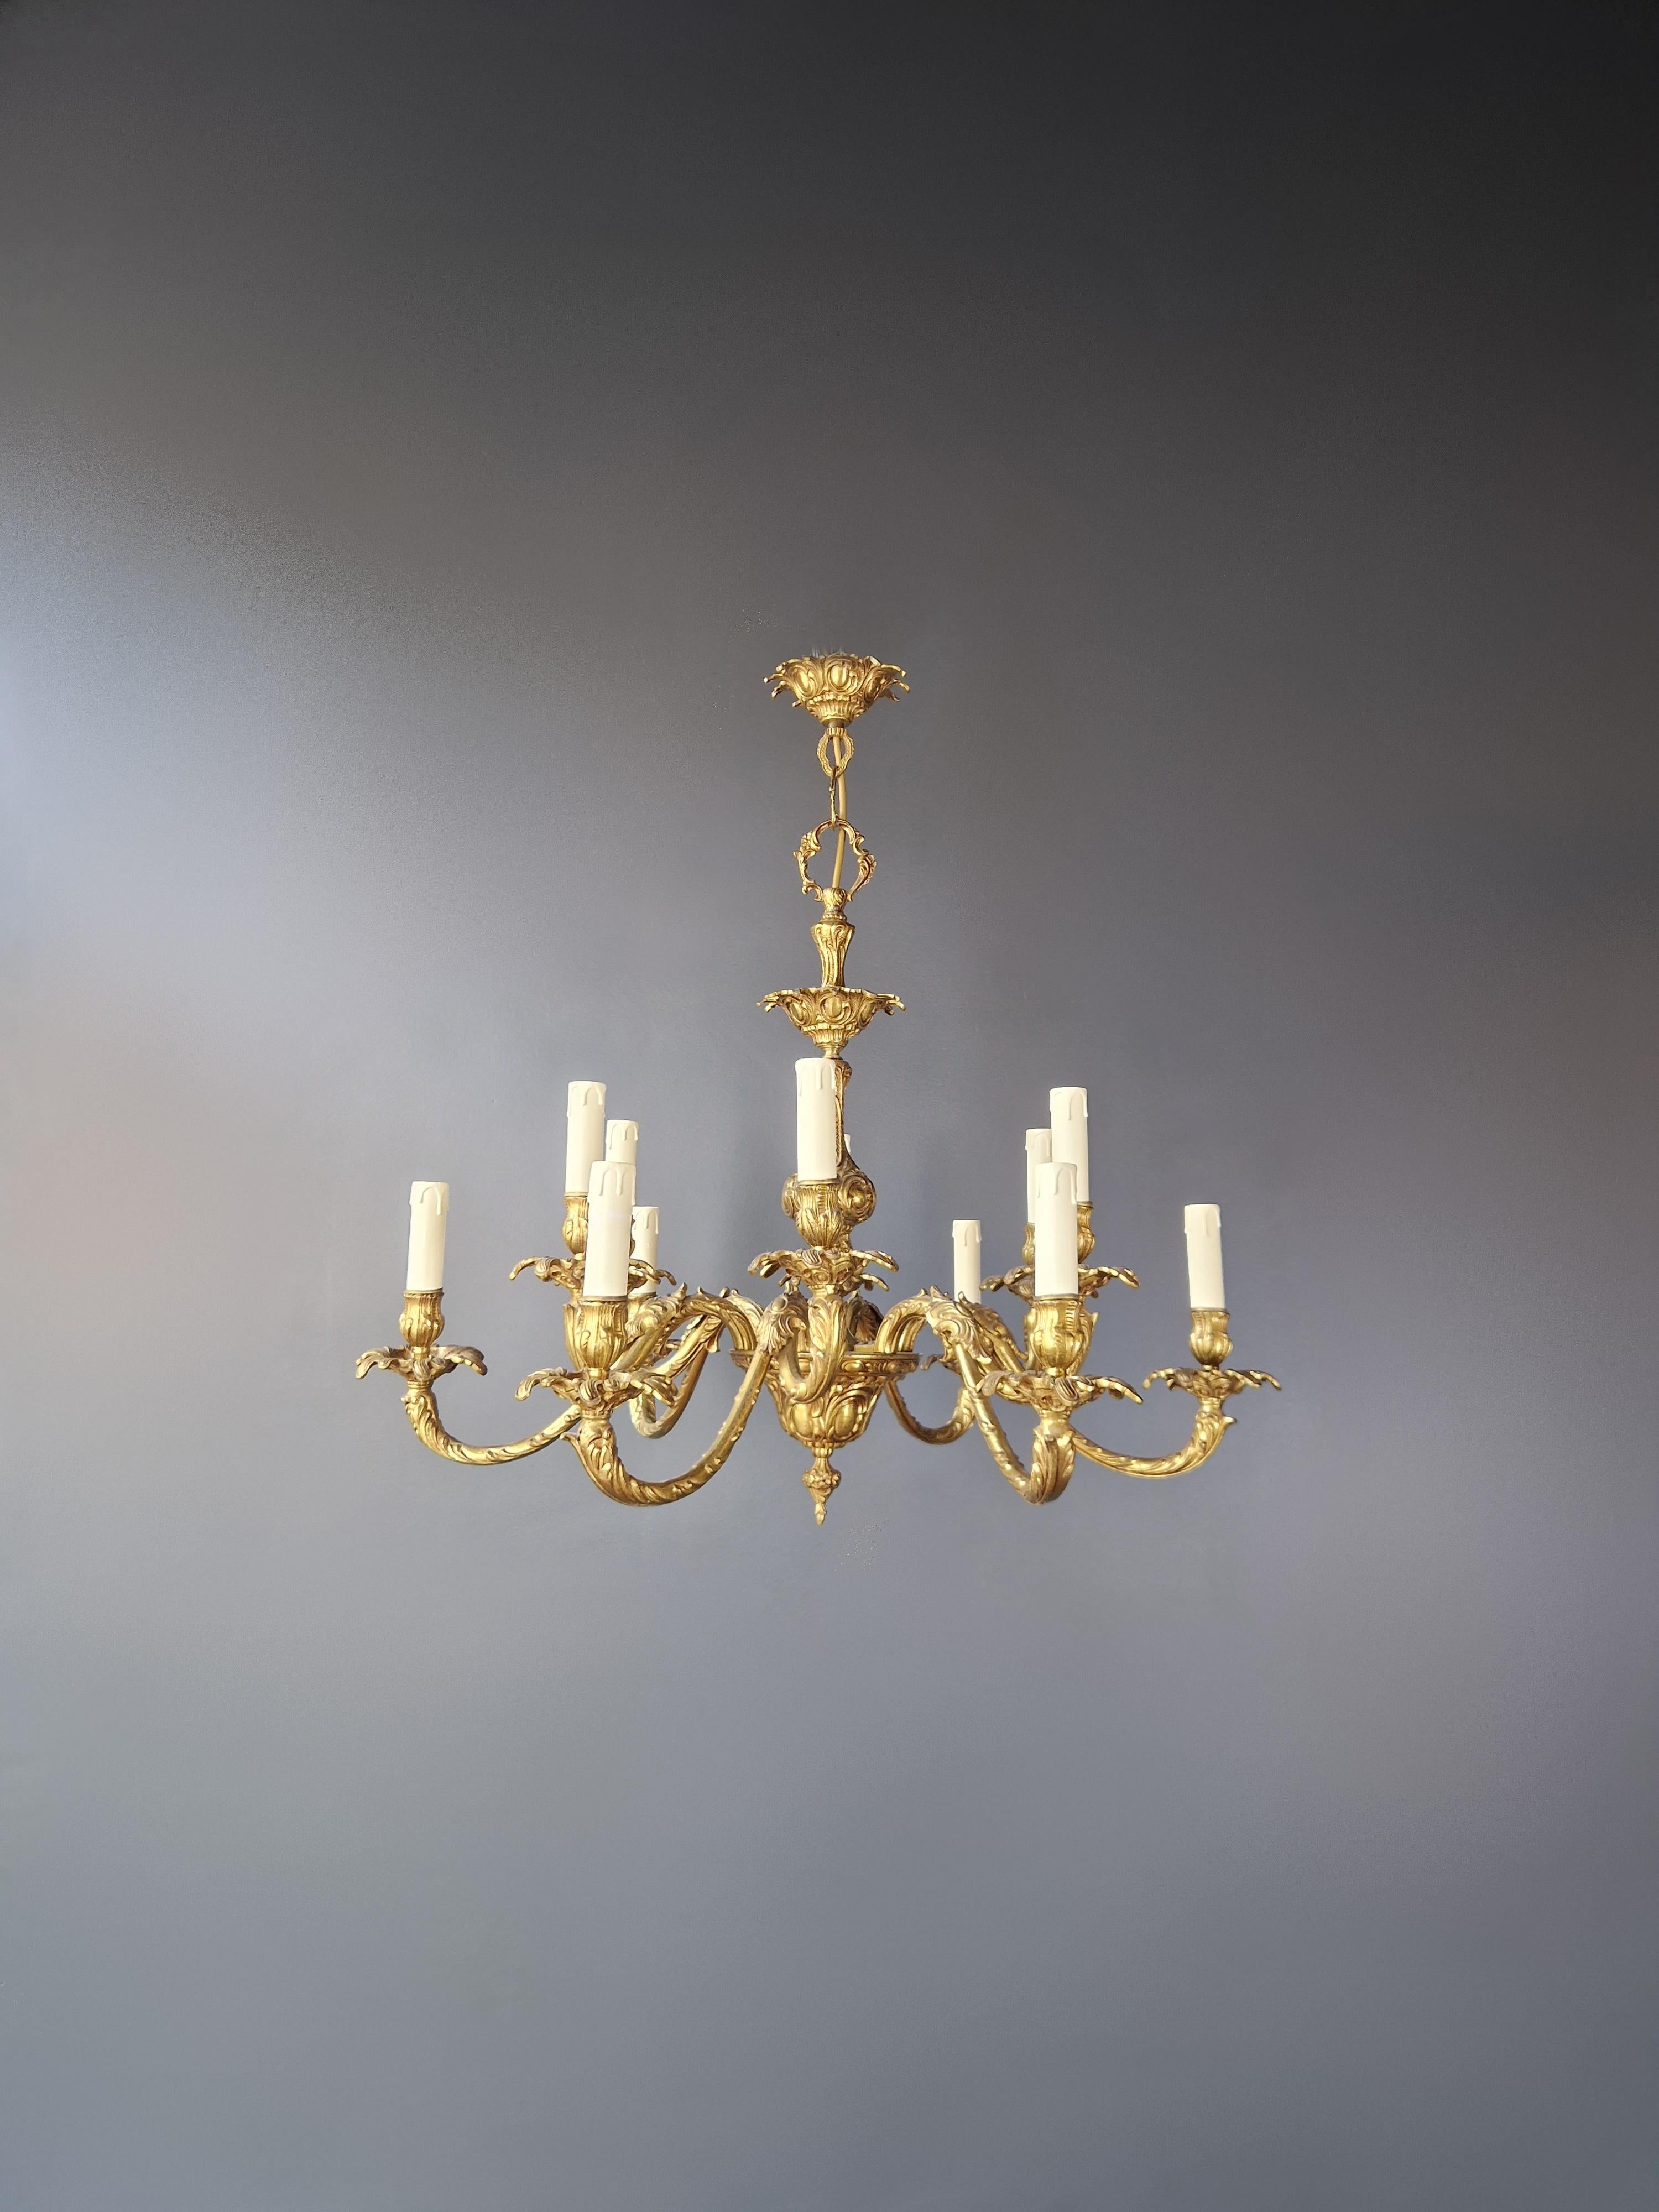 Old chandelier with love and professionally restored in Berlin. electrical wiring works in the US. Re-wired and ready to hang. Cabling completely renewed. 

Cabling and sockets completely renewed. 
Measures: Total height 70 cm, height without chain